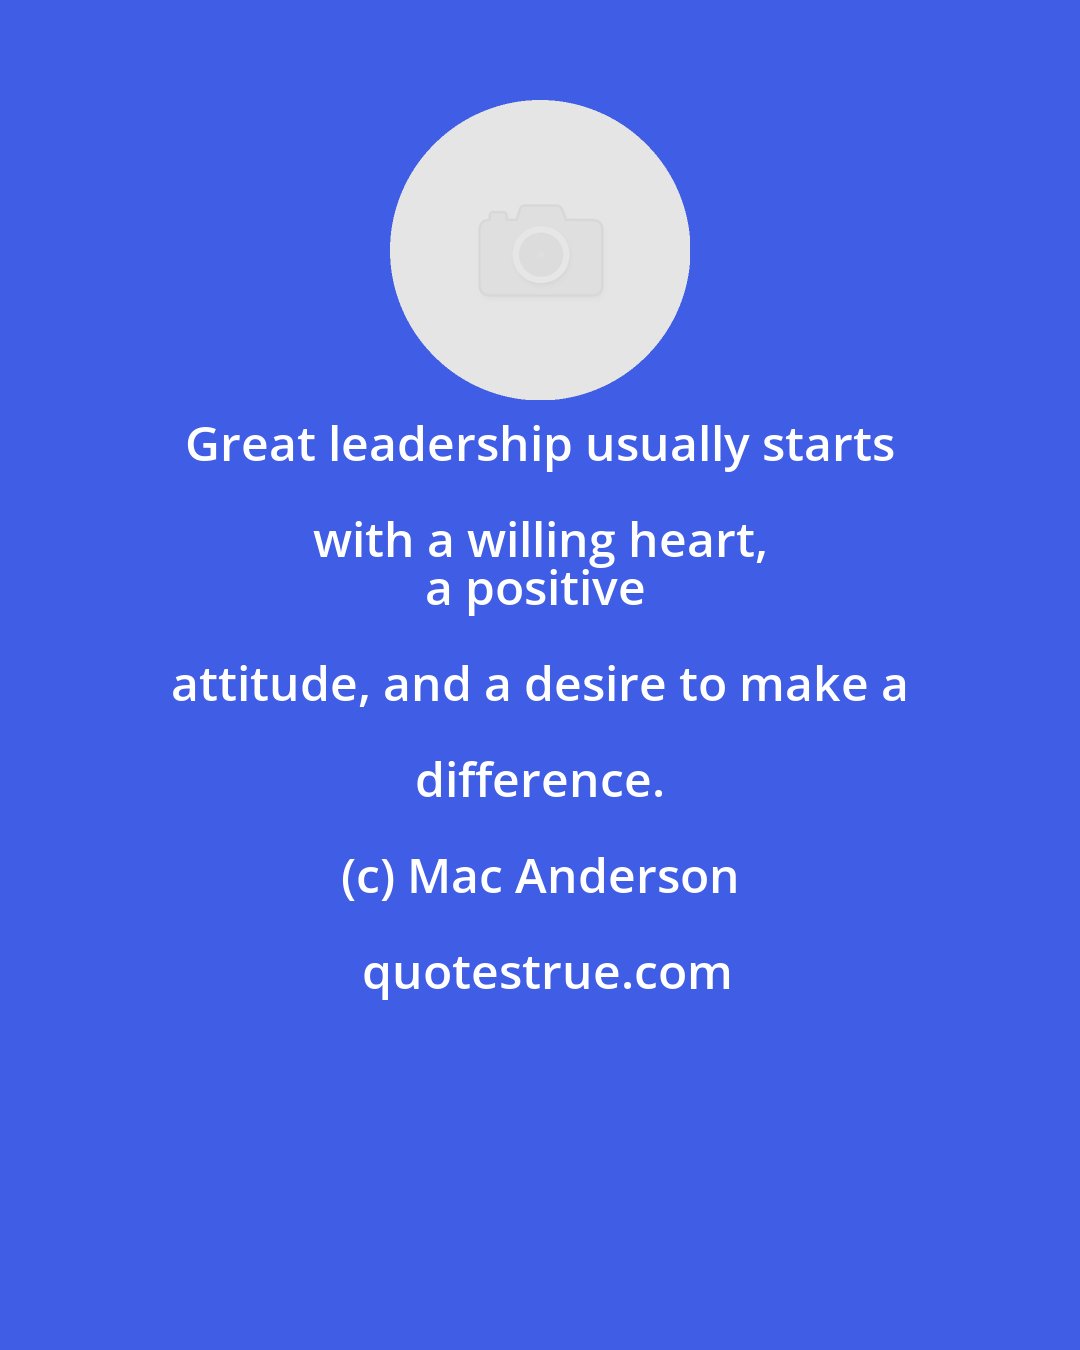 Mac Anderson: Great leadership usually starts with a willing heart, 
a positive attitude, and a desire to make a difference.